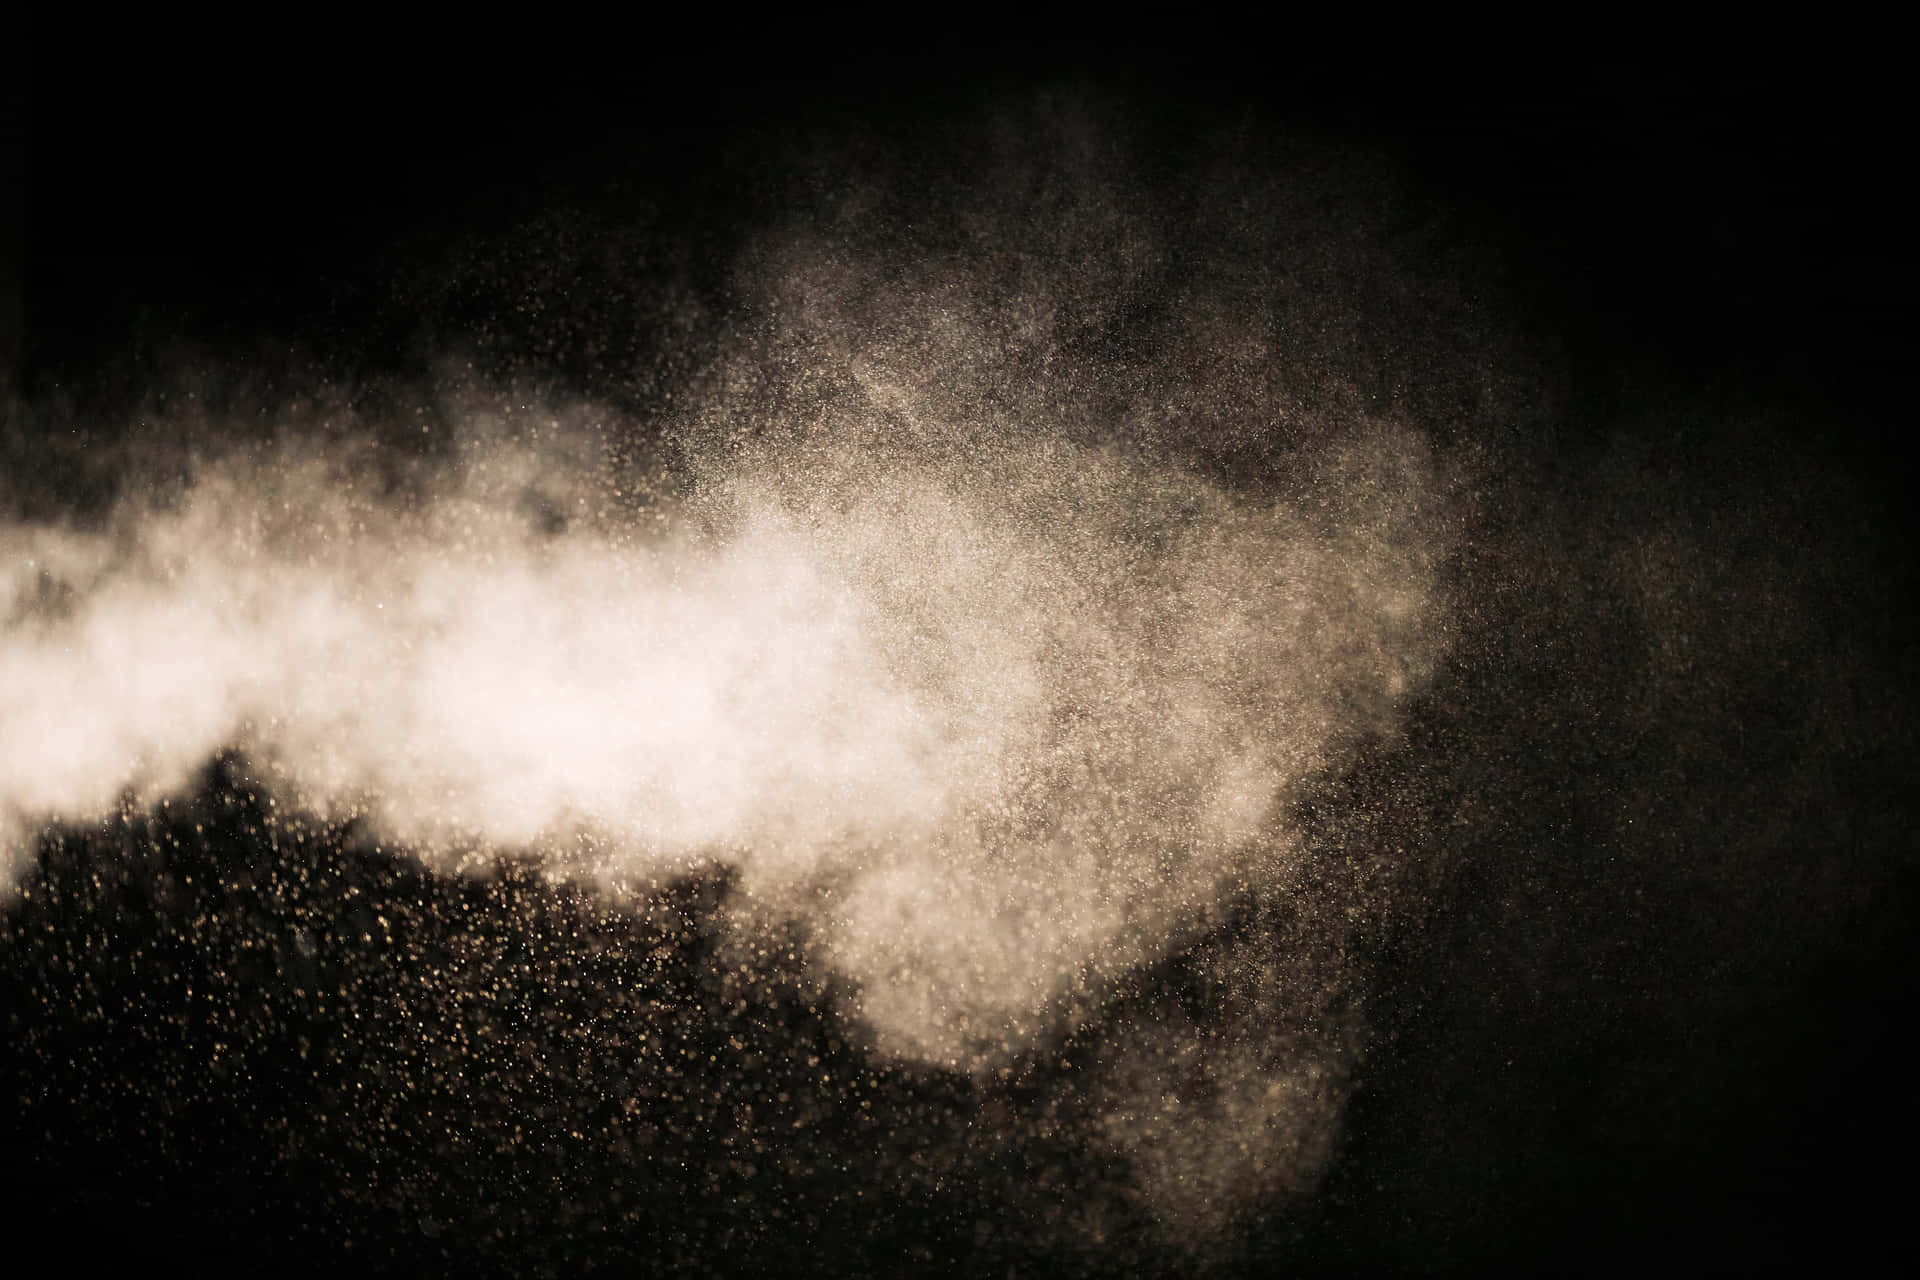 Abstract, dust-filled background to welcome the new dawn.